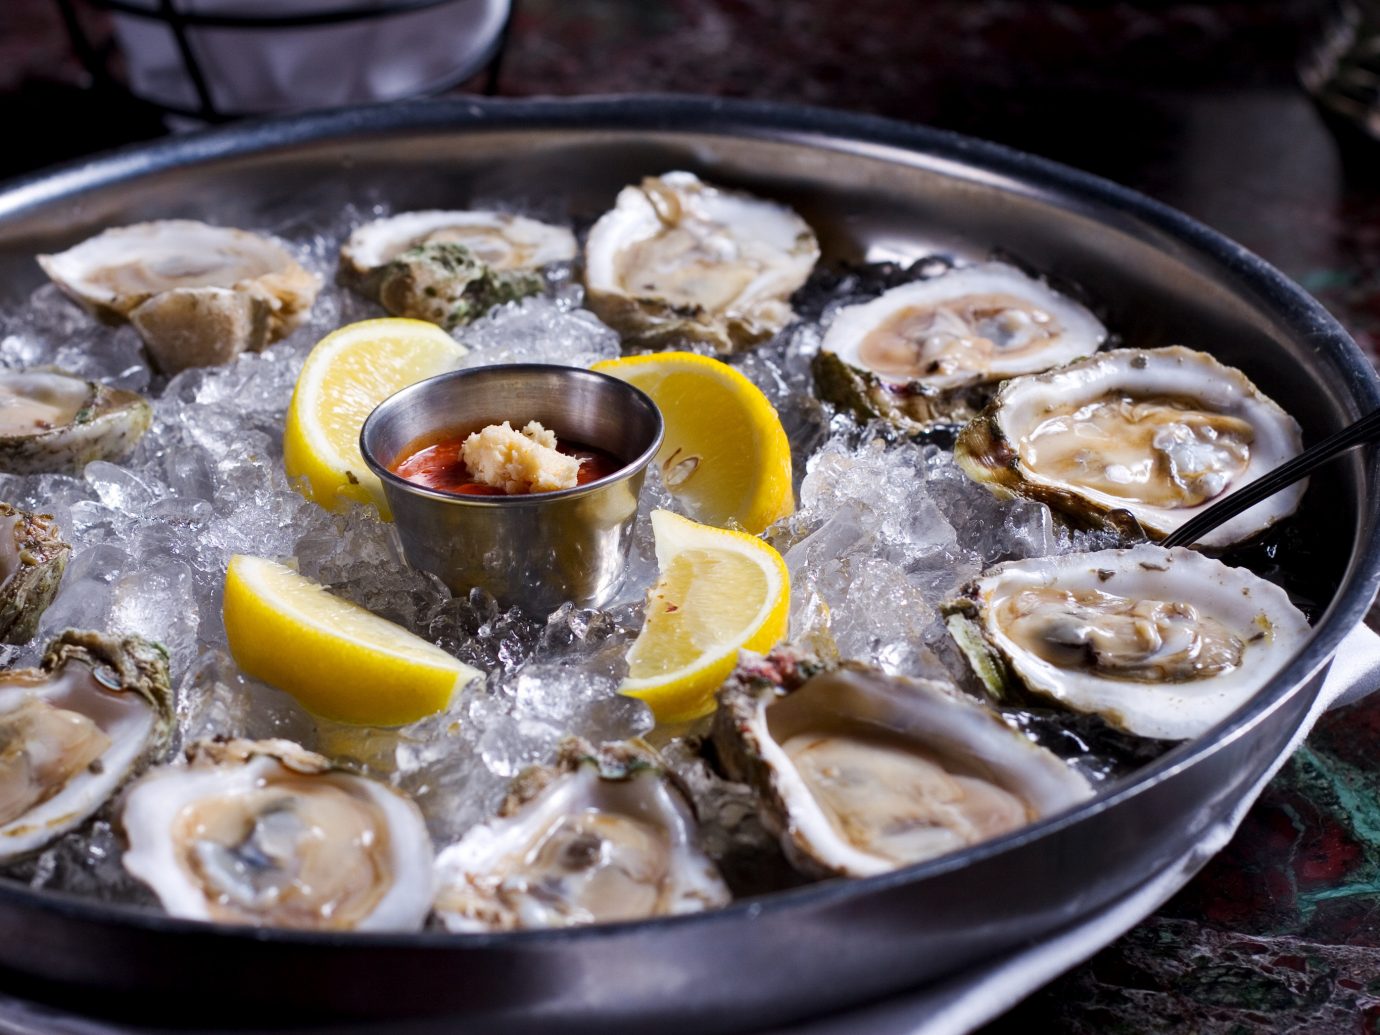 Food + Drink food oyster Seafood clams oysters mussels and scallops dish animal source foods clam meal recipe pan